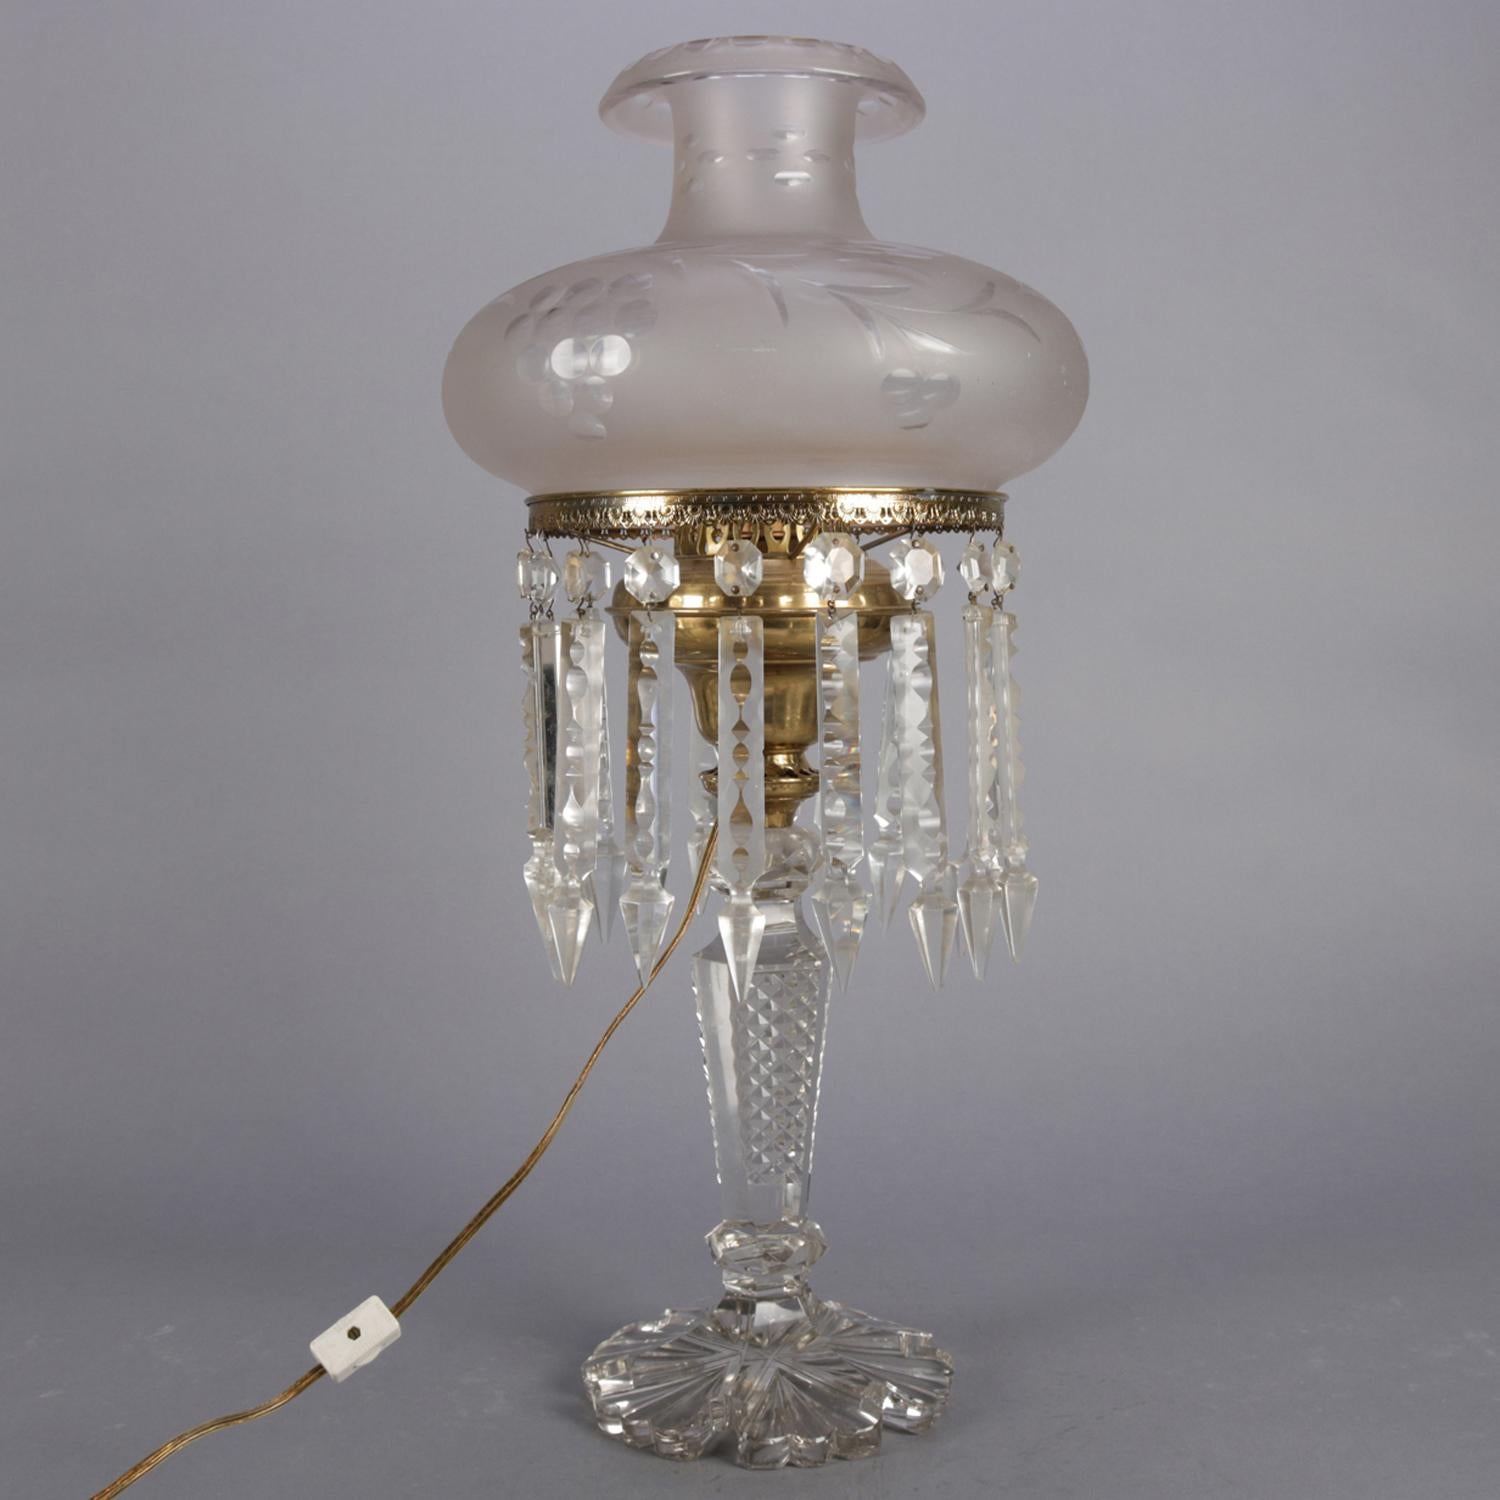 antique lamp with hanging crystals